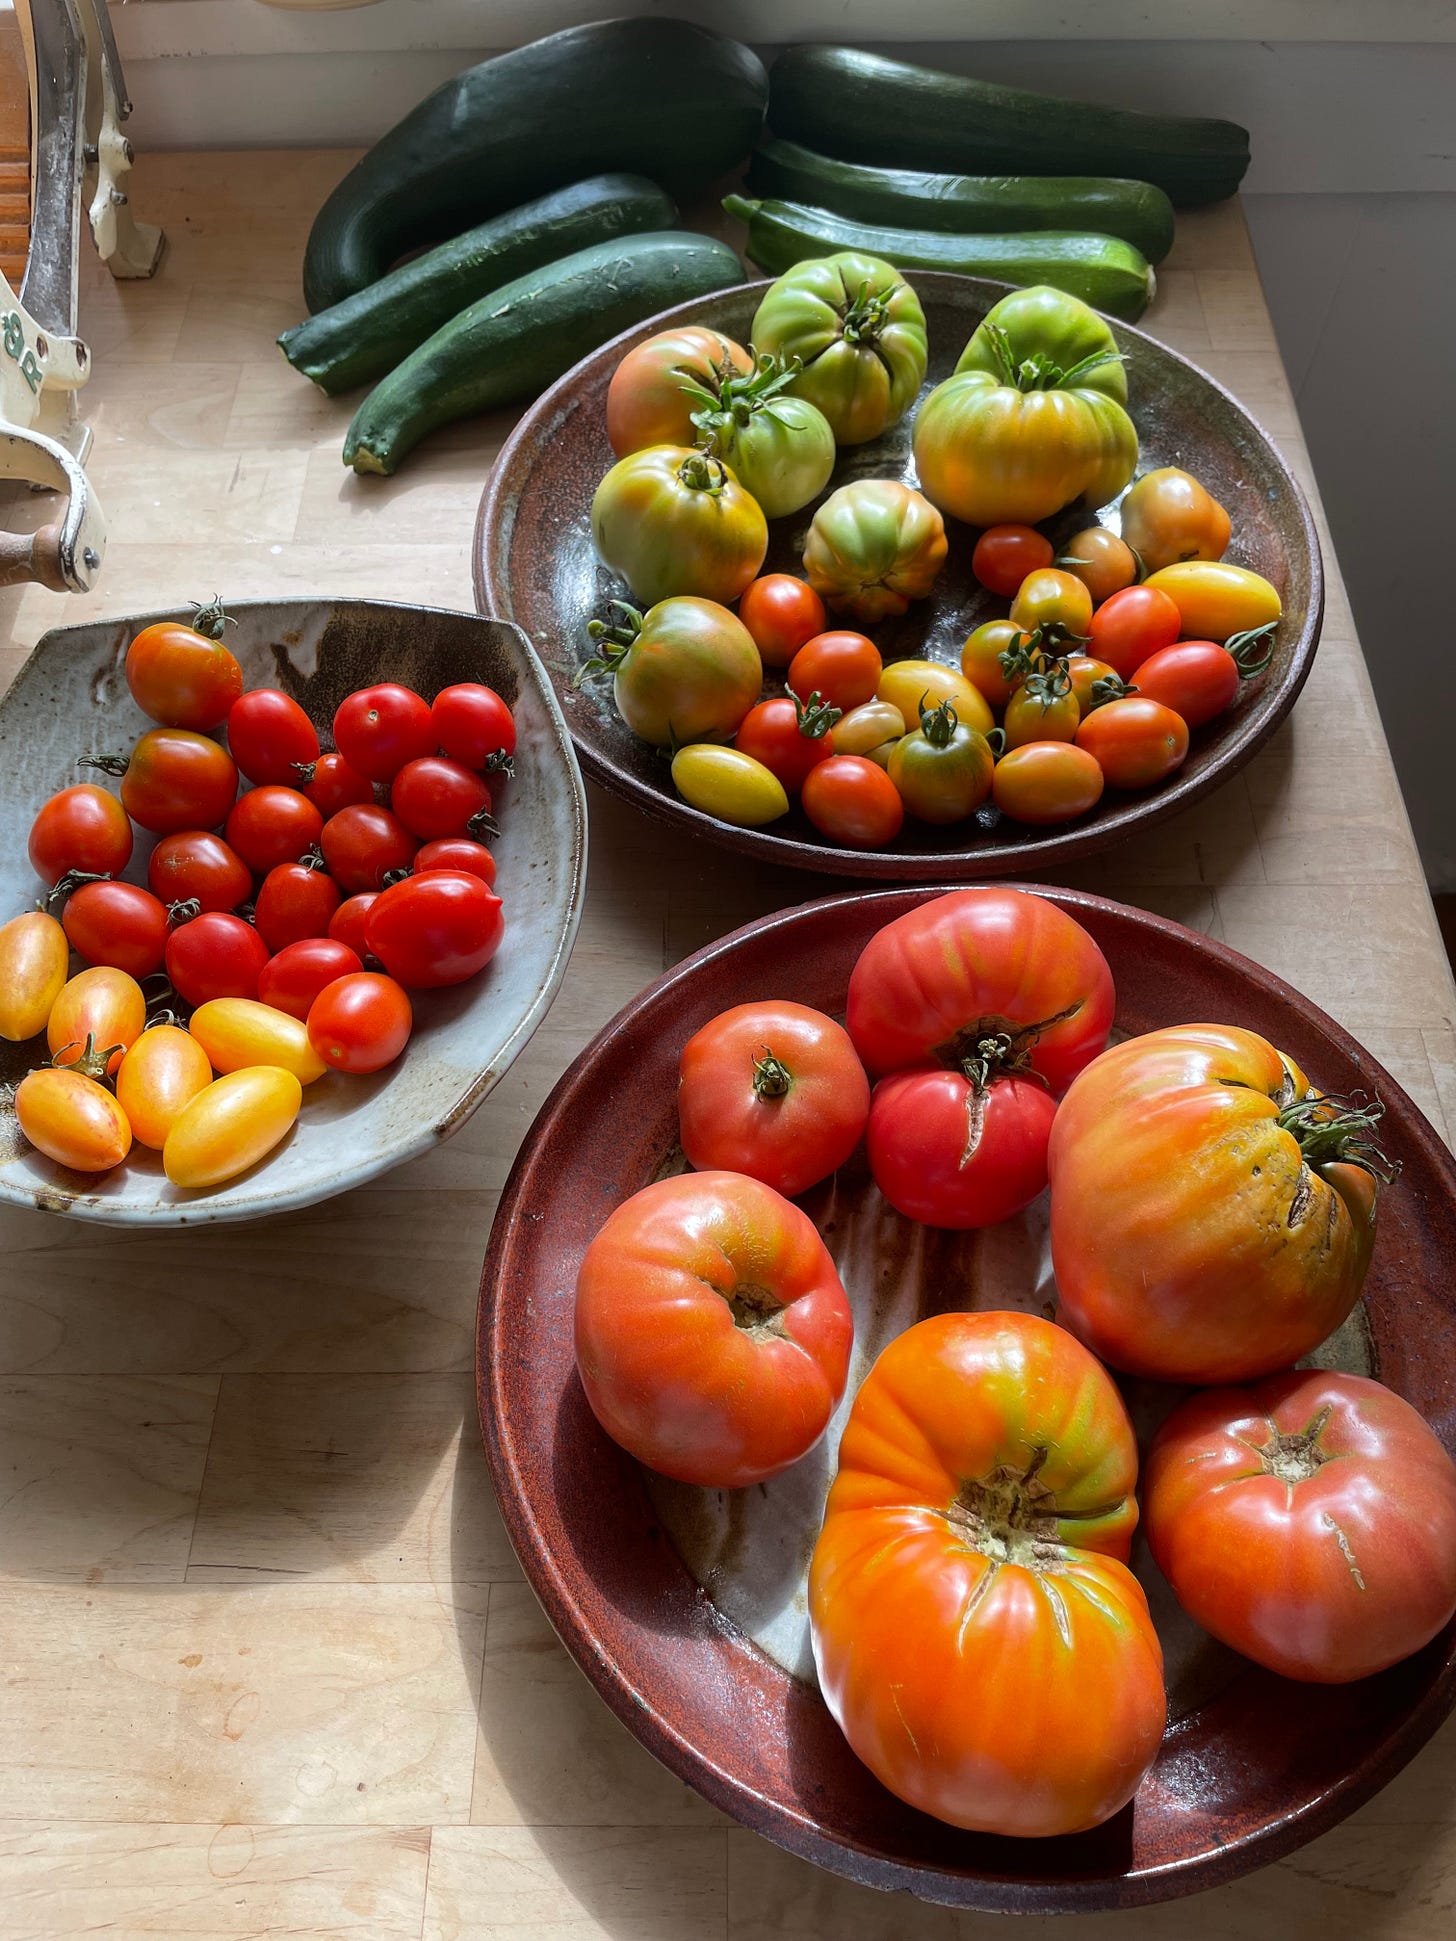 photograph of many tomatoes and zucchinis on a butcher block table